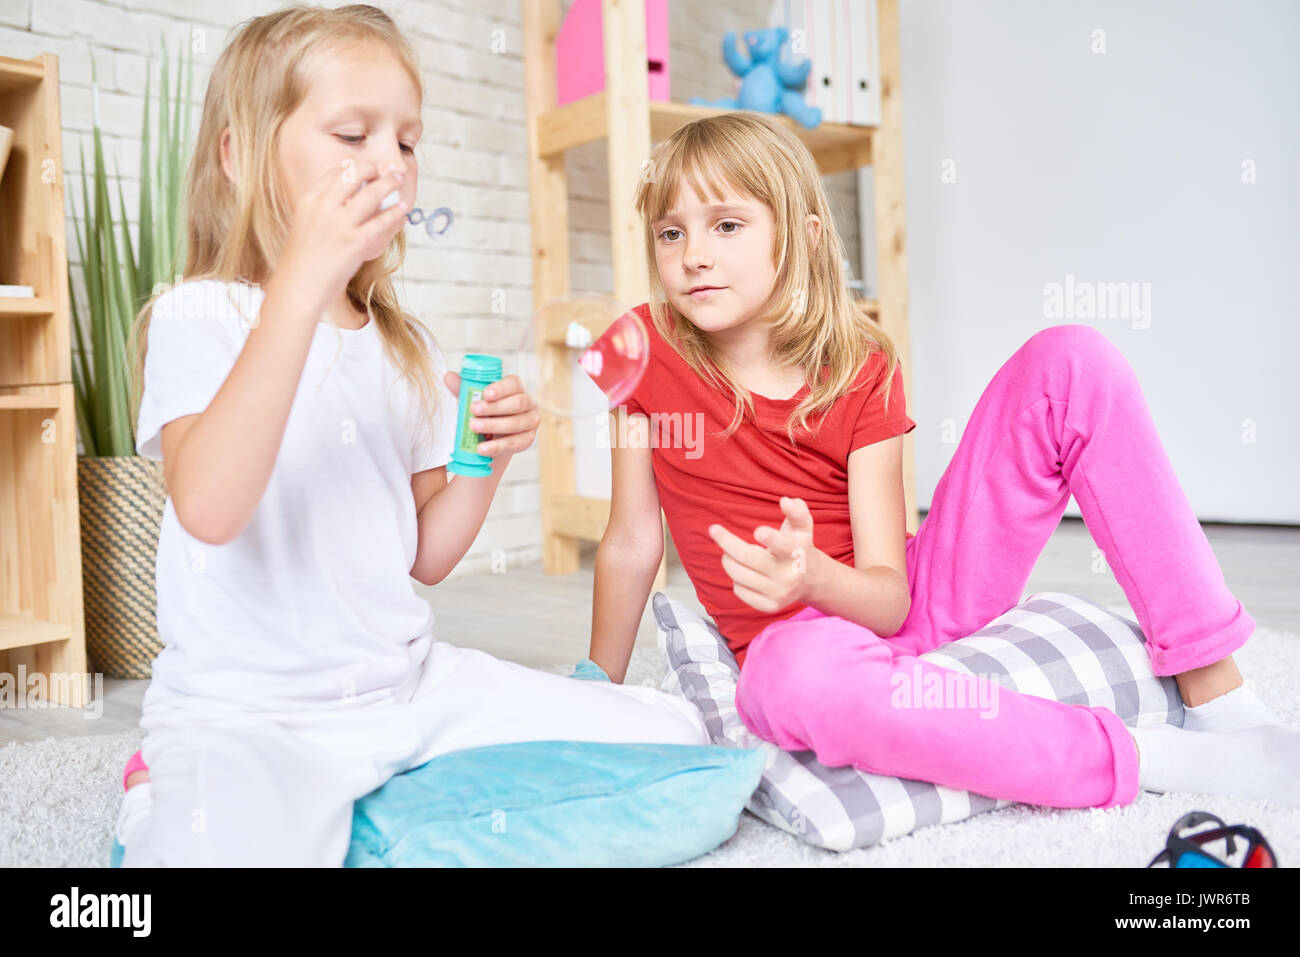 Pretty blond-haired sisters wearing home clothing gathered together in cozy living room and blowing bubbles Stock Photo